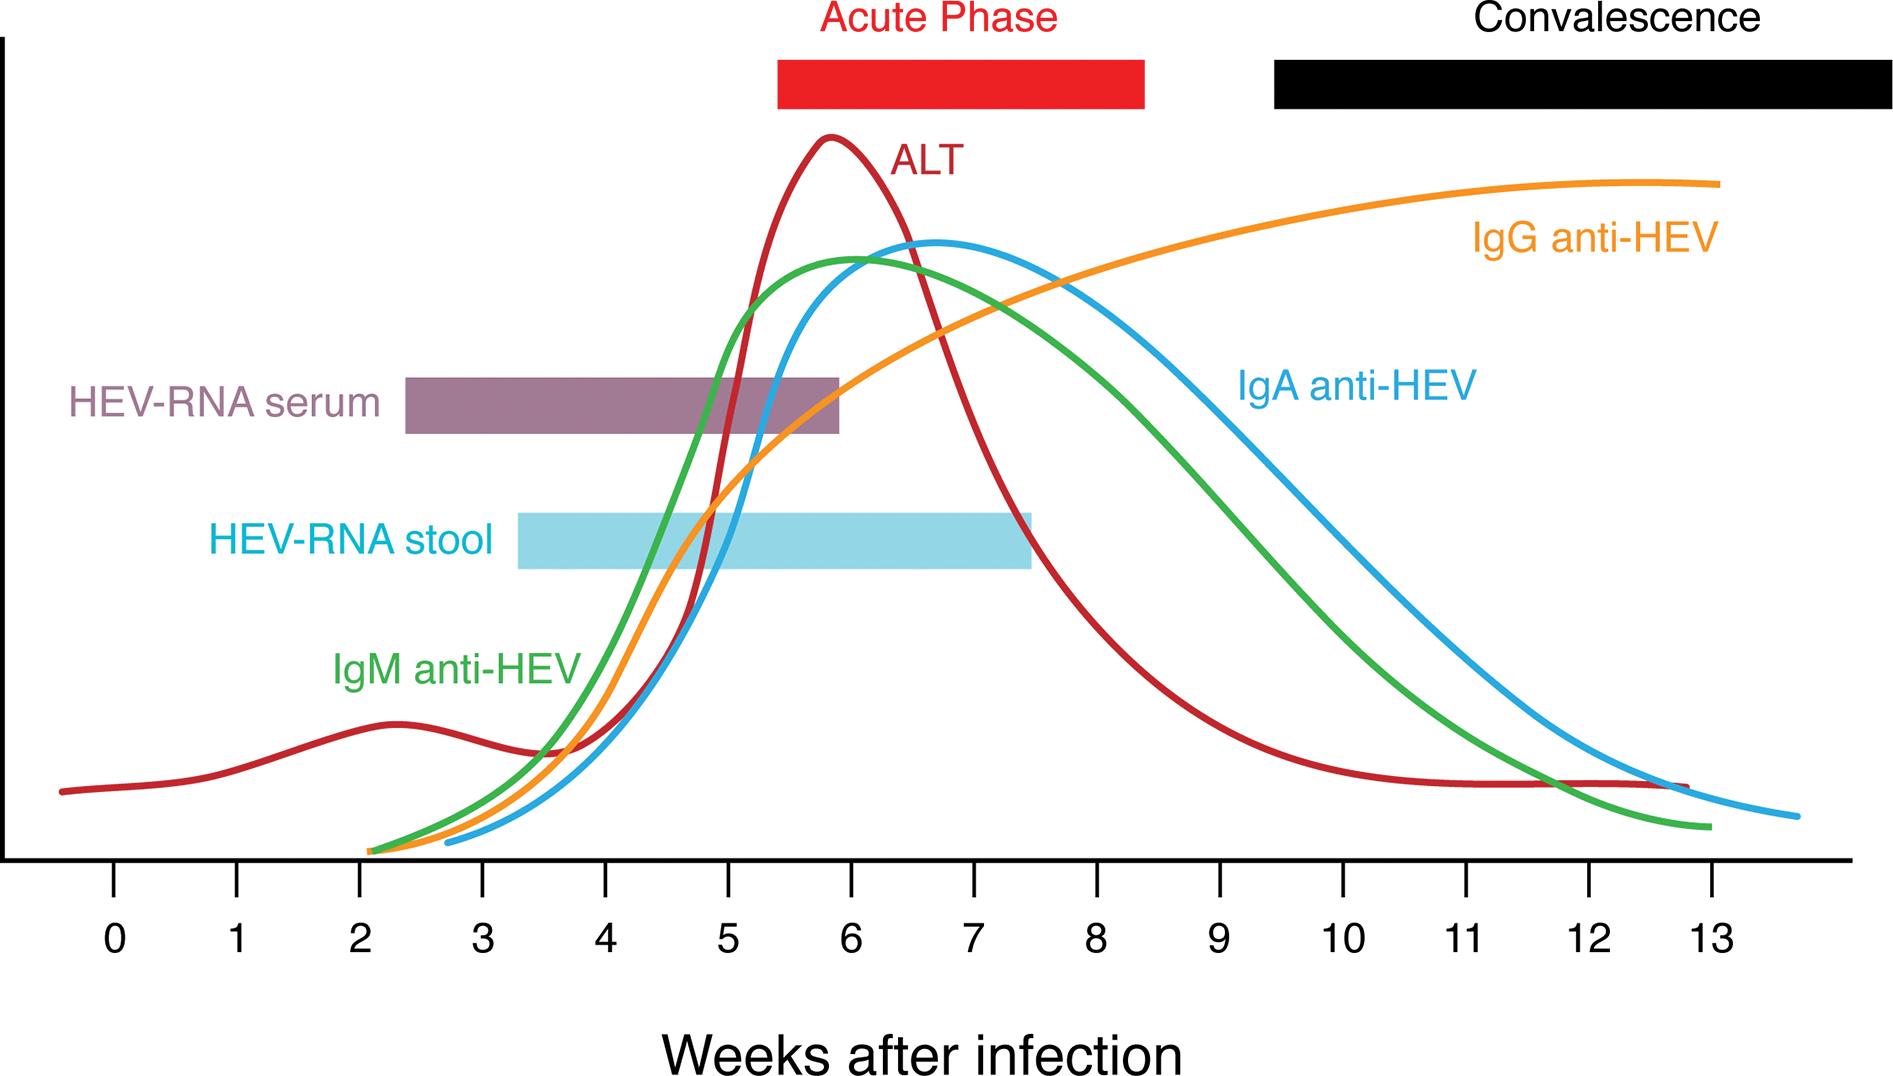 Schematic summary of main pathogenetic events (virology, serology, disease) during acute HEV infection.